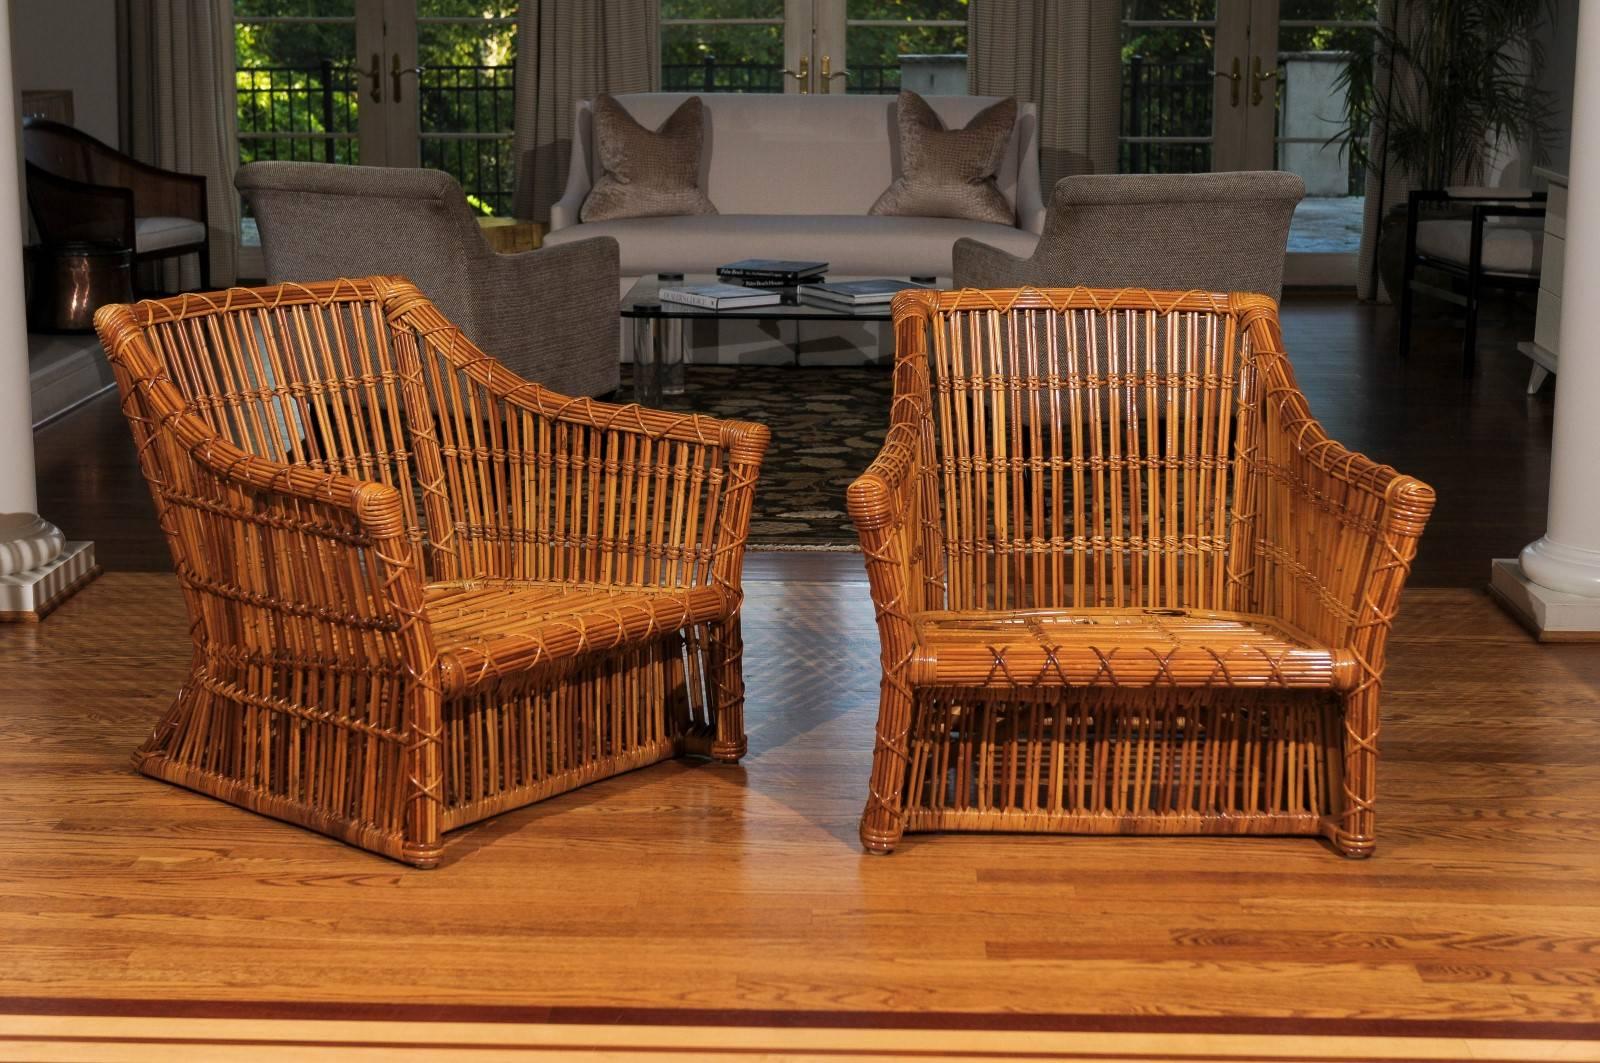 An absolutely stunning pair of vintage club chairs by McGuire, circa 1980. Examples from an extremely limited series. Expertly crafted hardwood frame construction veneered in pencil reed rattan. Incredible workmanship, detail and quality.